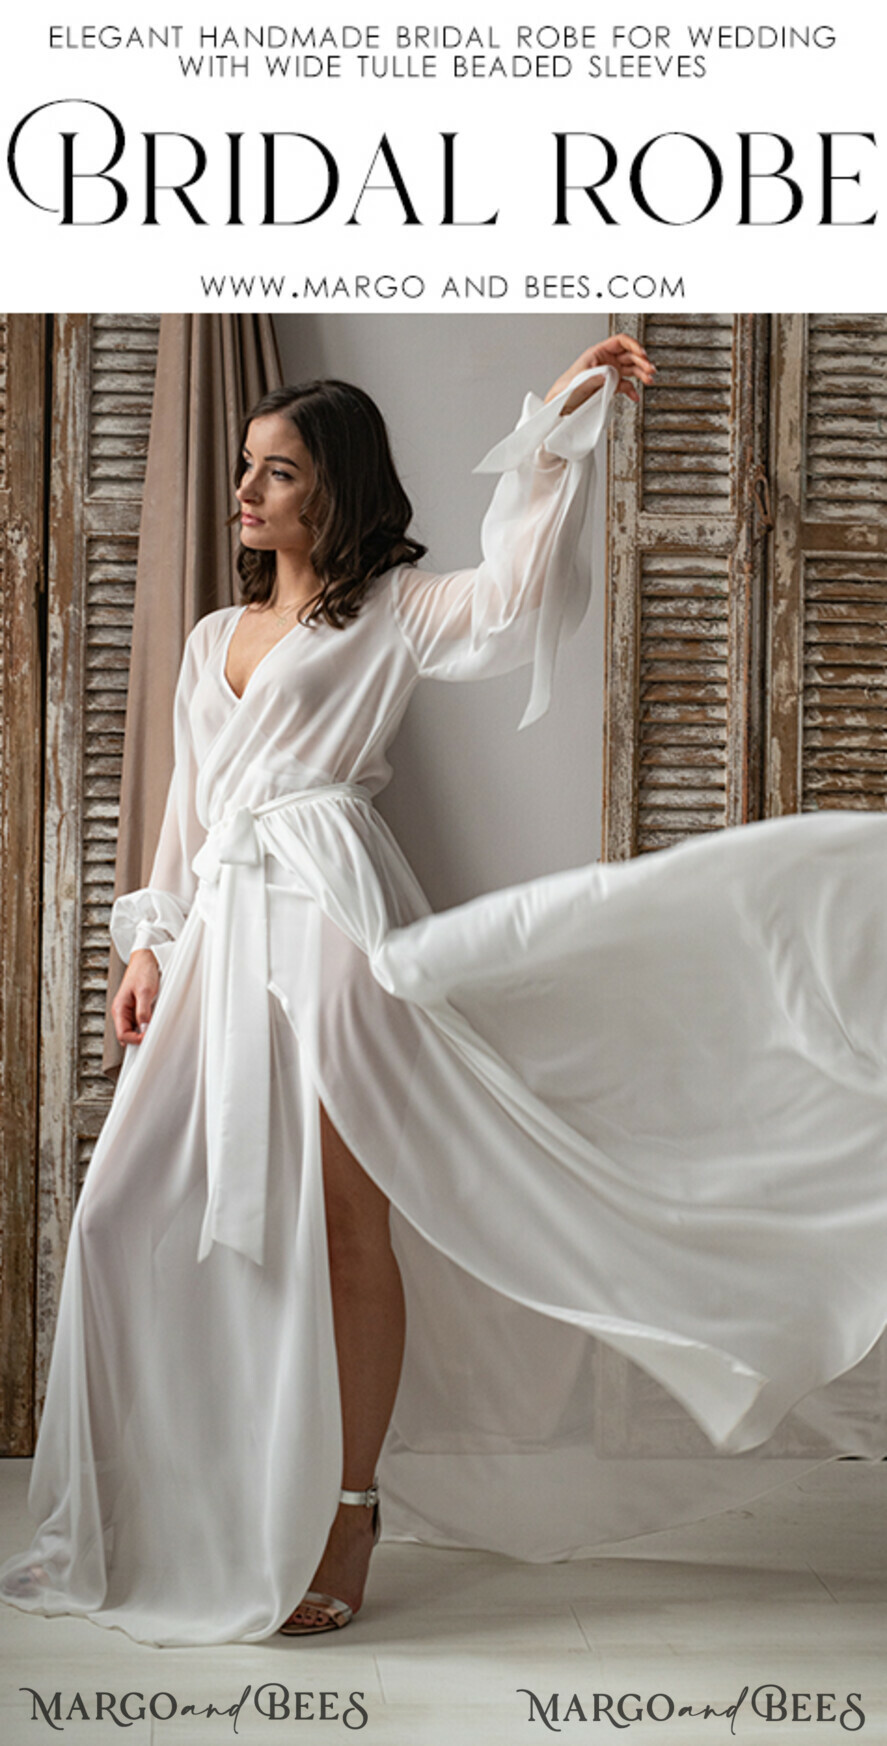 Luxury Bridal Robe Brand - Vogue's Must Have Gift for Brides in